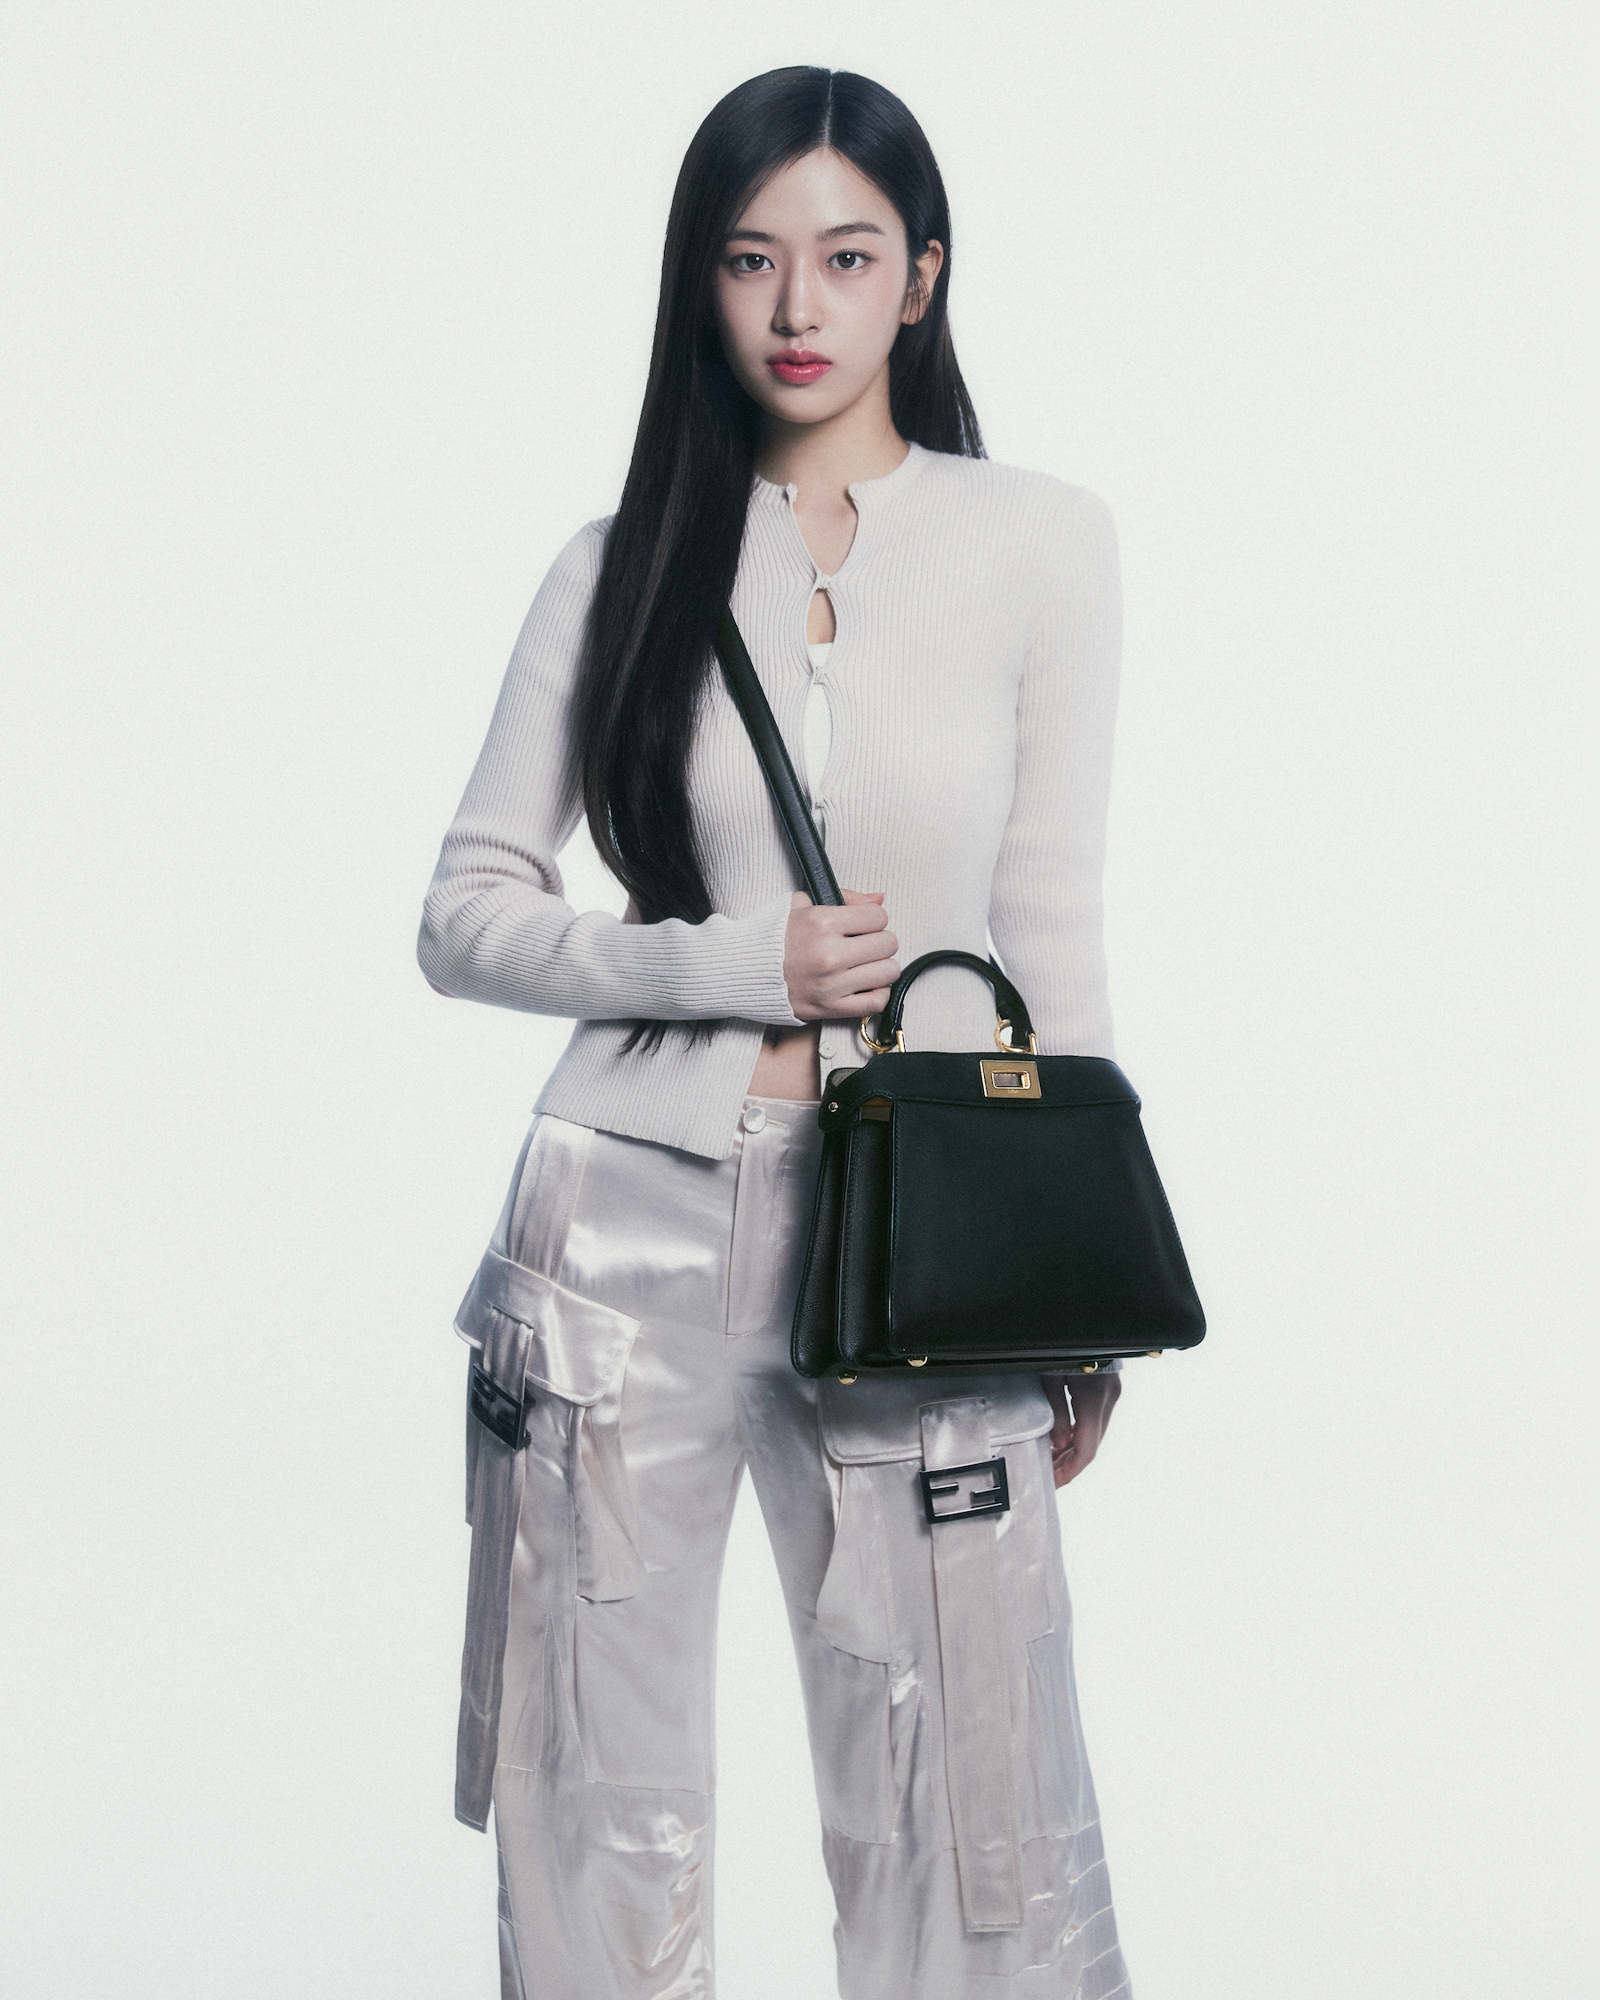 All six Korean ambassadors for 'Chanel' display their iconic